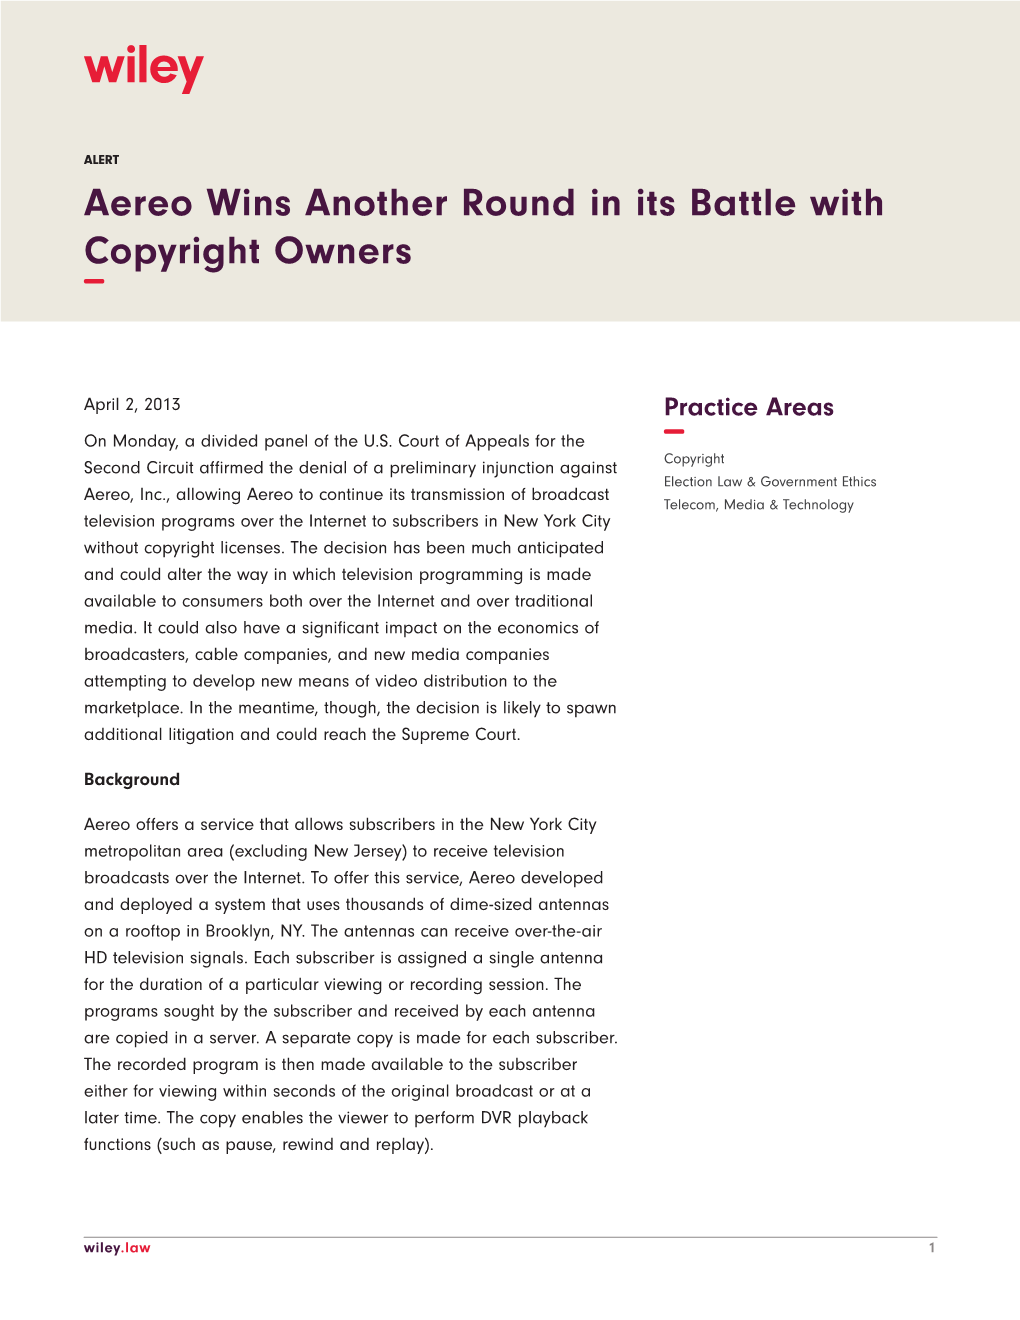 Aereo Wins Another Round in Its Battle with Copyright Owners −